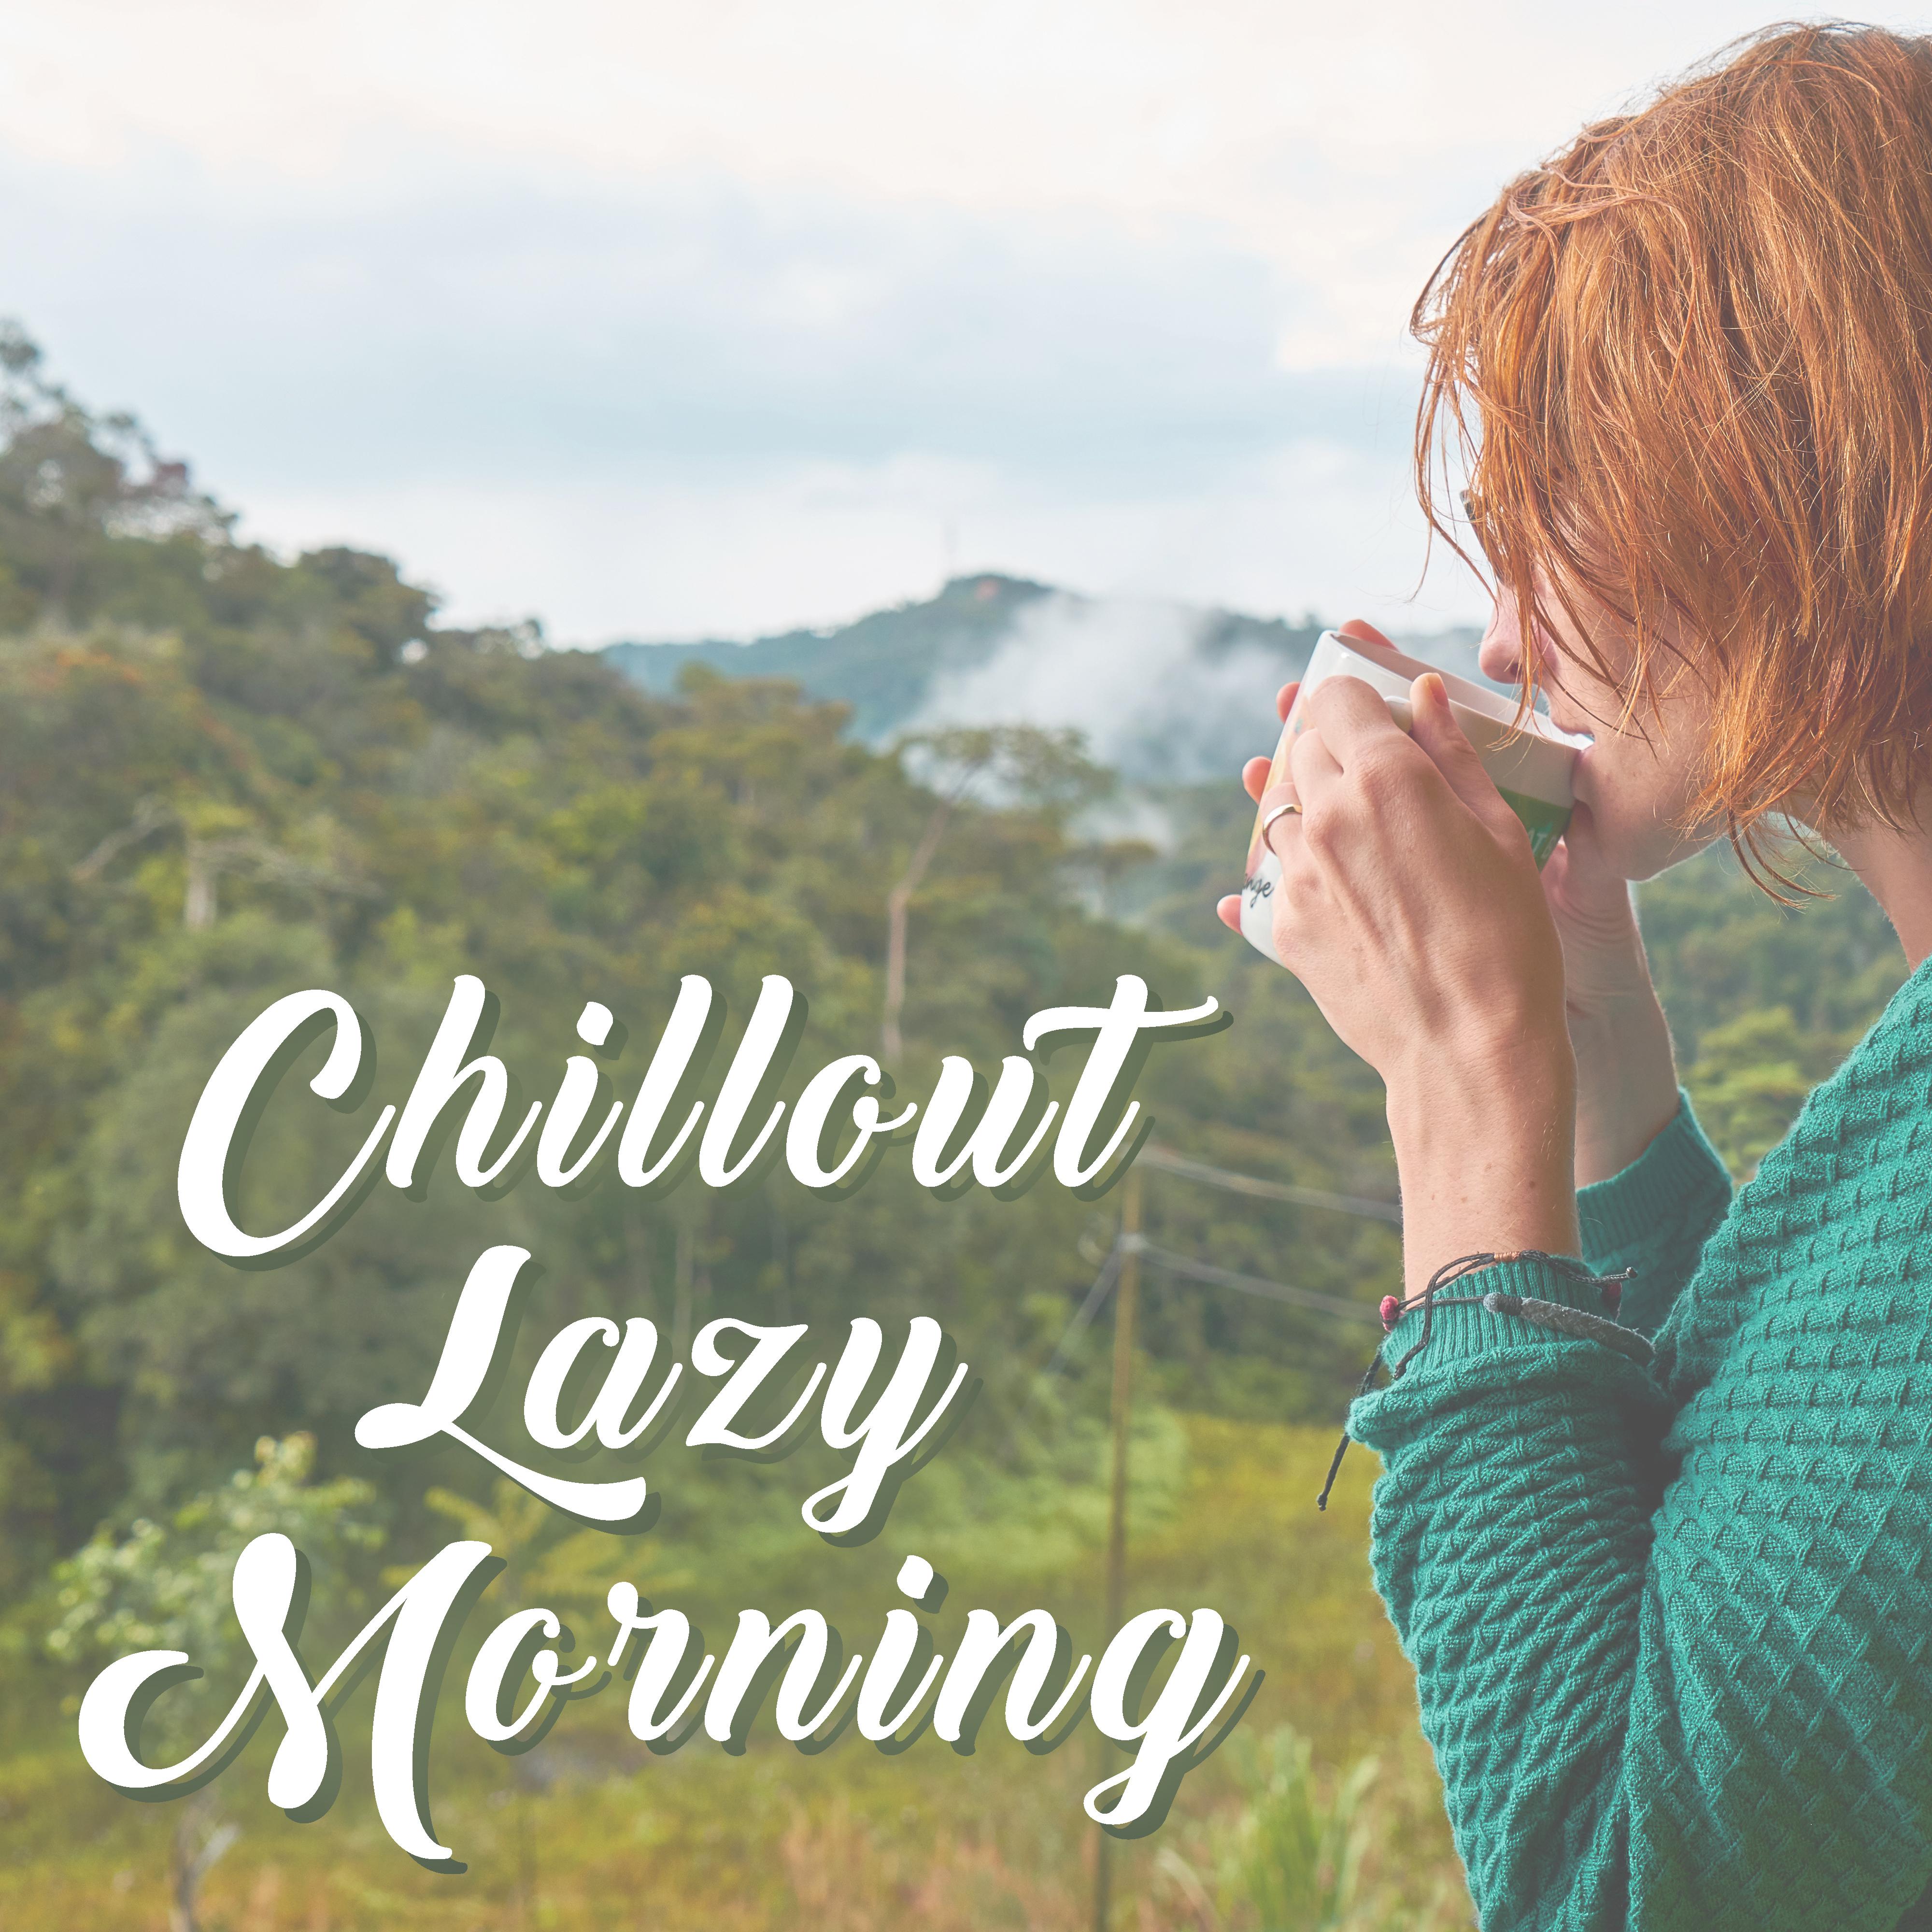 Chillout Lazy Morning – Chillout After Sleep, Relaxed Morning Music, Positive Vibes, Cafe Lounge